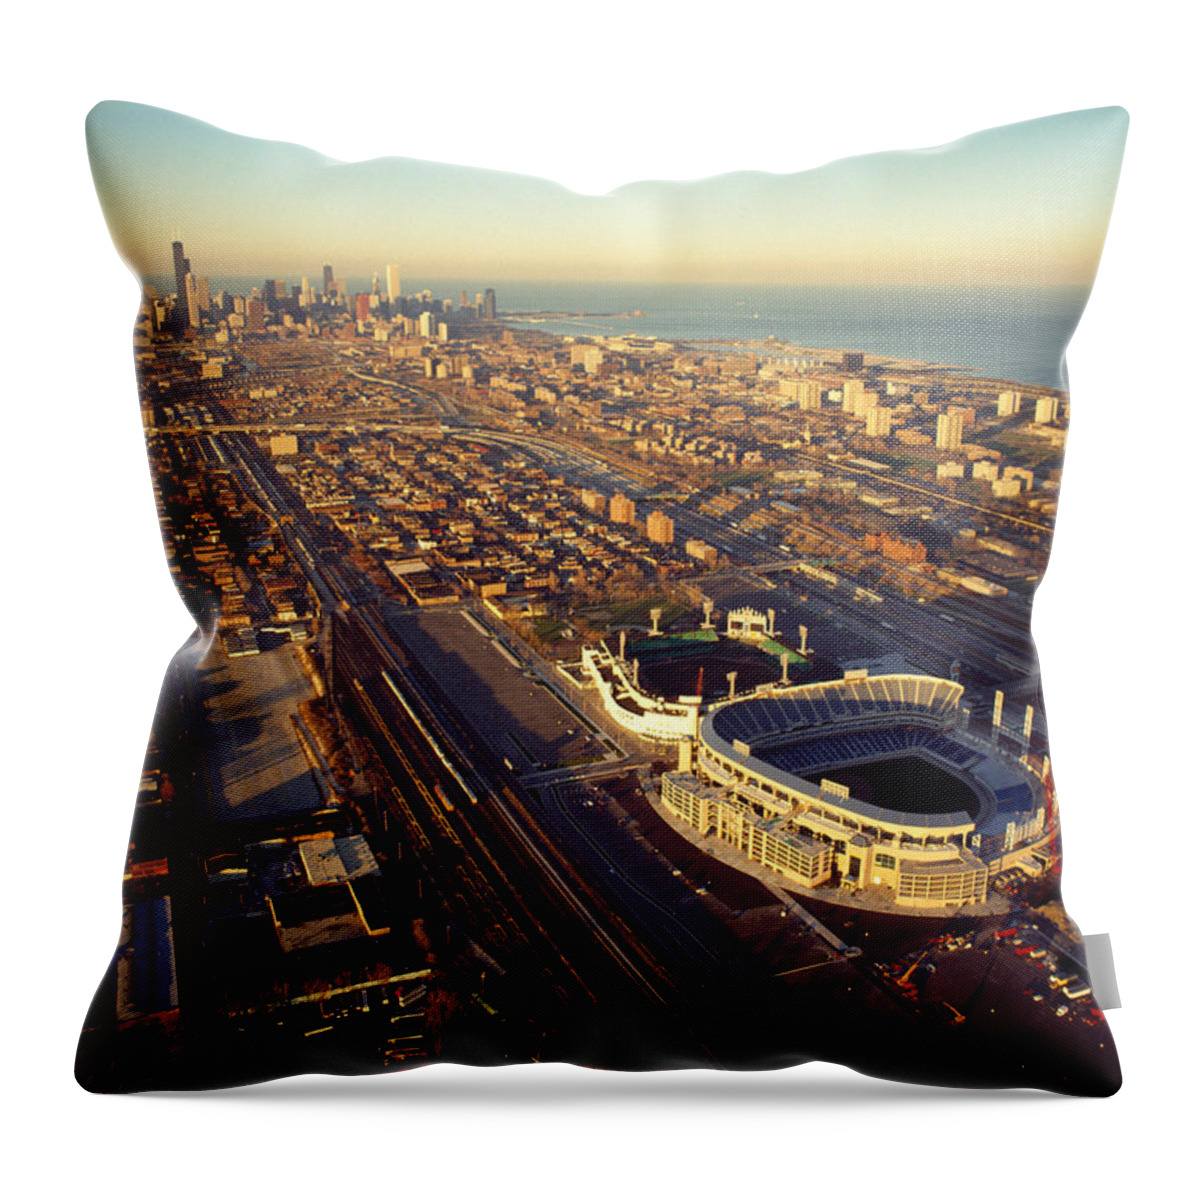 Photography Throw Pillow featuring the photograph Aerial View Of A City, Old Comiskey by Panoramic Images